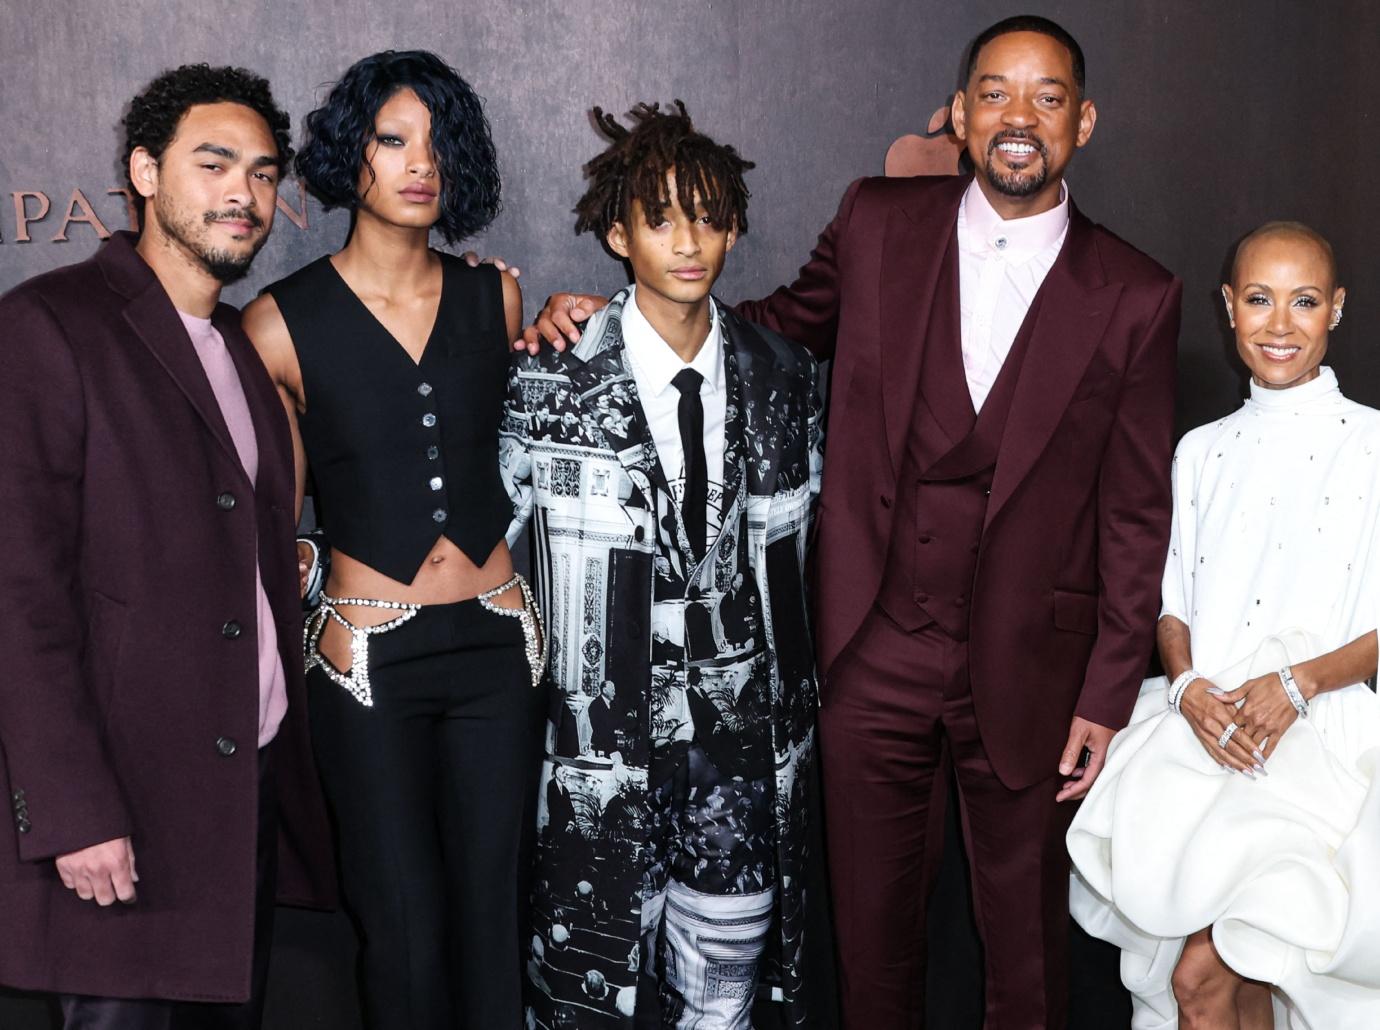 Jaden Smith showers praises over Will Smith post smackdown at